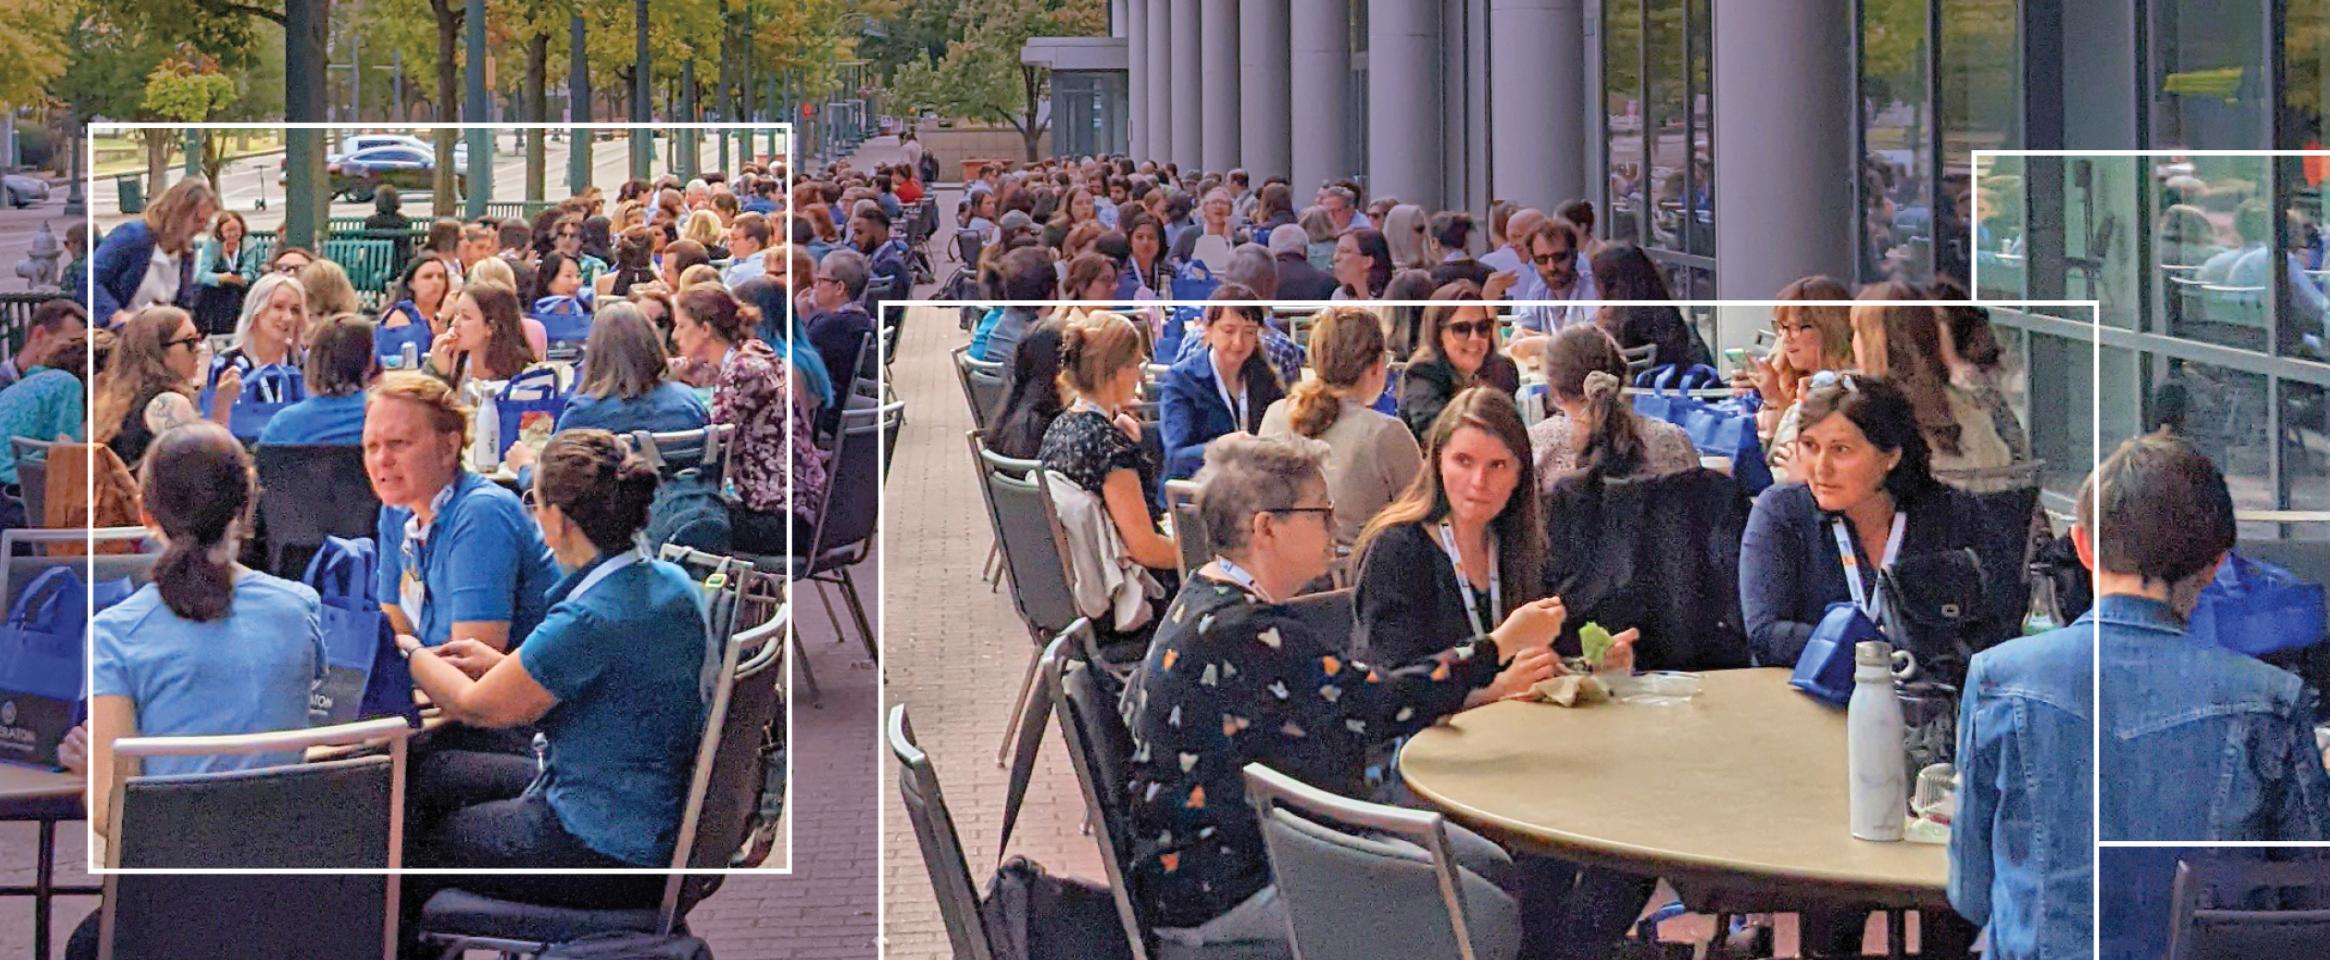 Inset photo from the Winter Spring 2023 cover art, showing hundreds of people dining on outdoor tables stretching into the distance at Science Writers 2022.